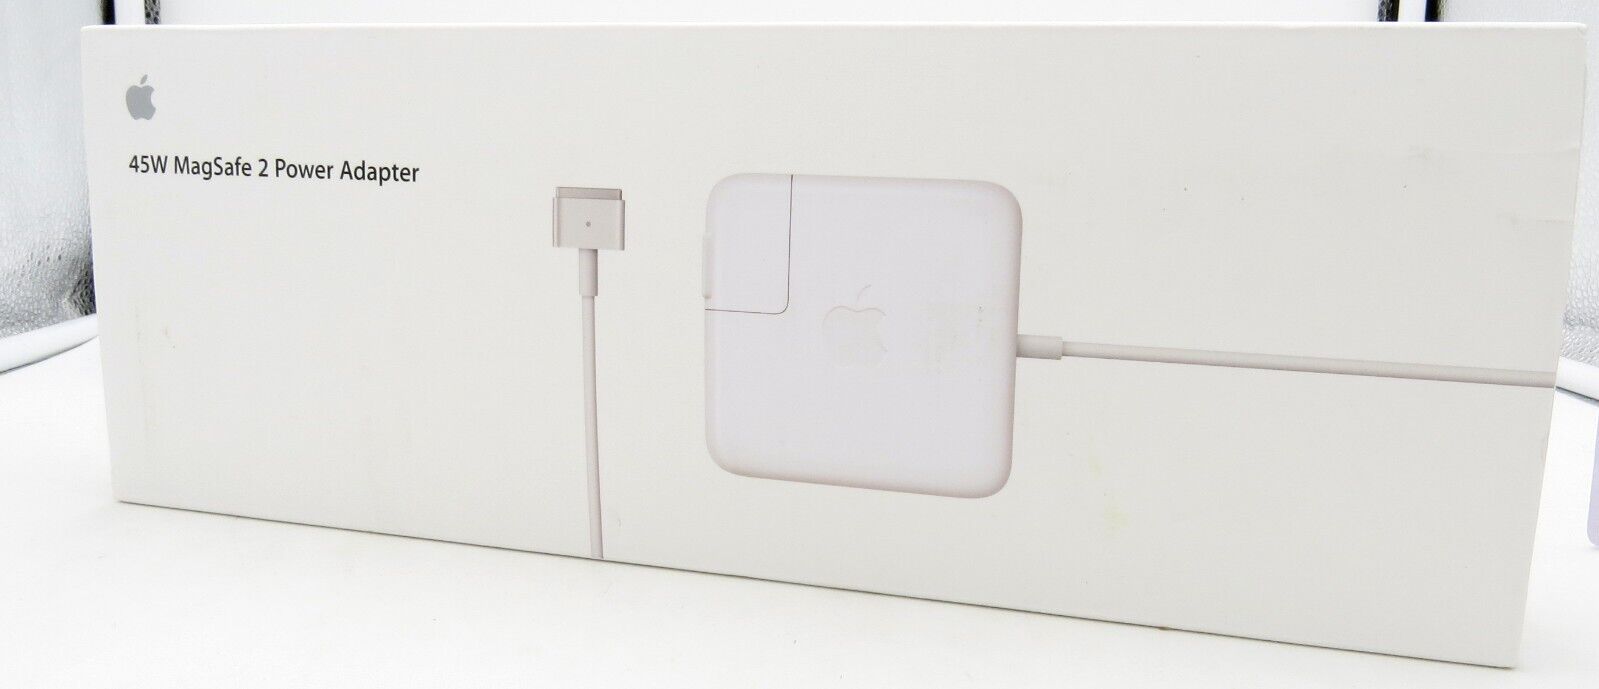 Apple Magsafe 2 45W Power Adapter - MD592LL/A for MacBook Air Original OEM